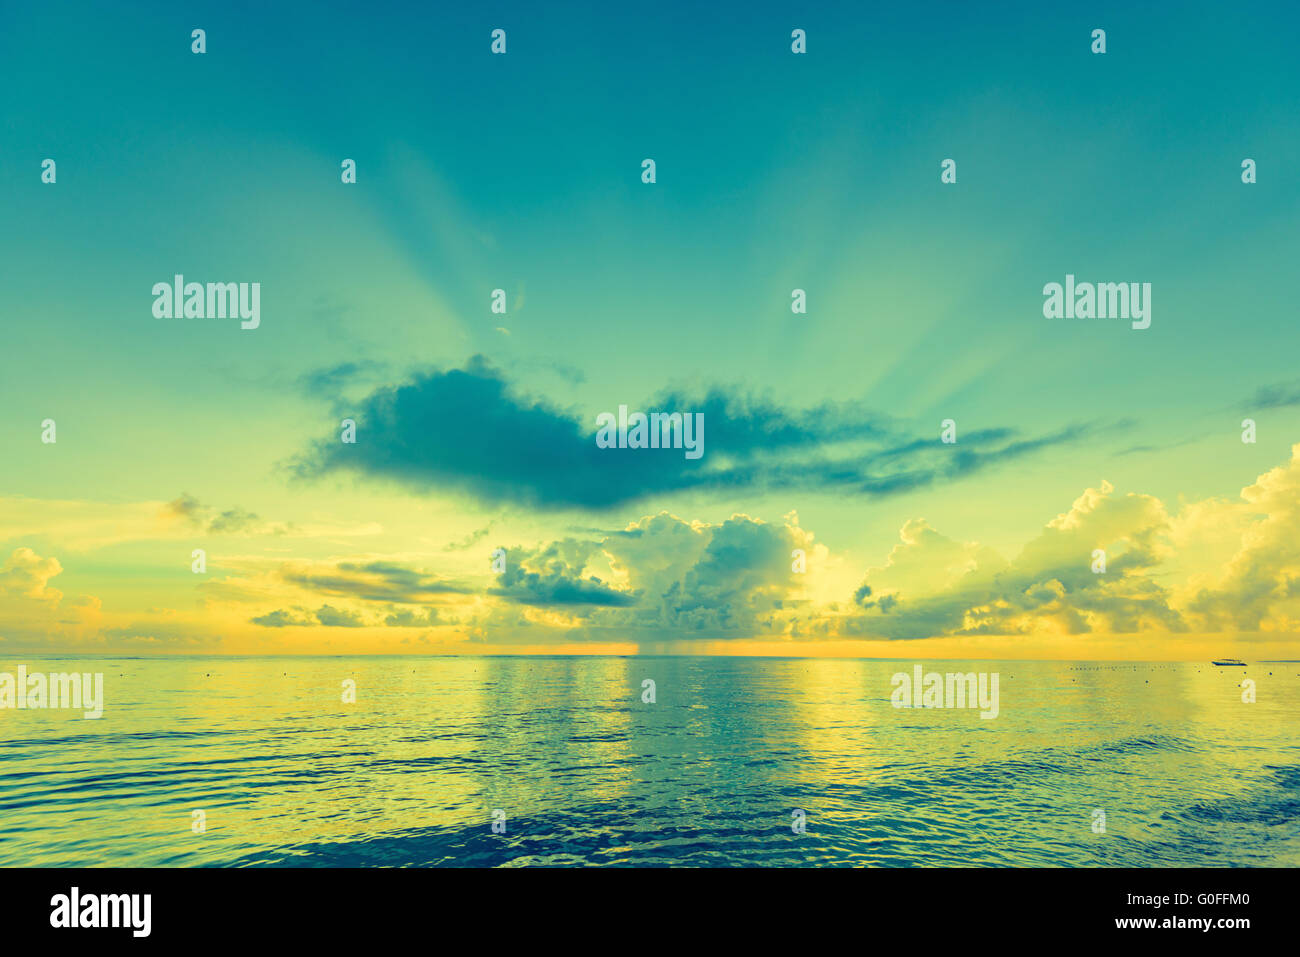 waves on the sea landscape on a background of blue sky with clouds Stock Photo